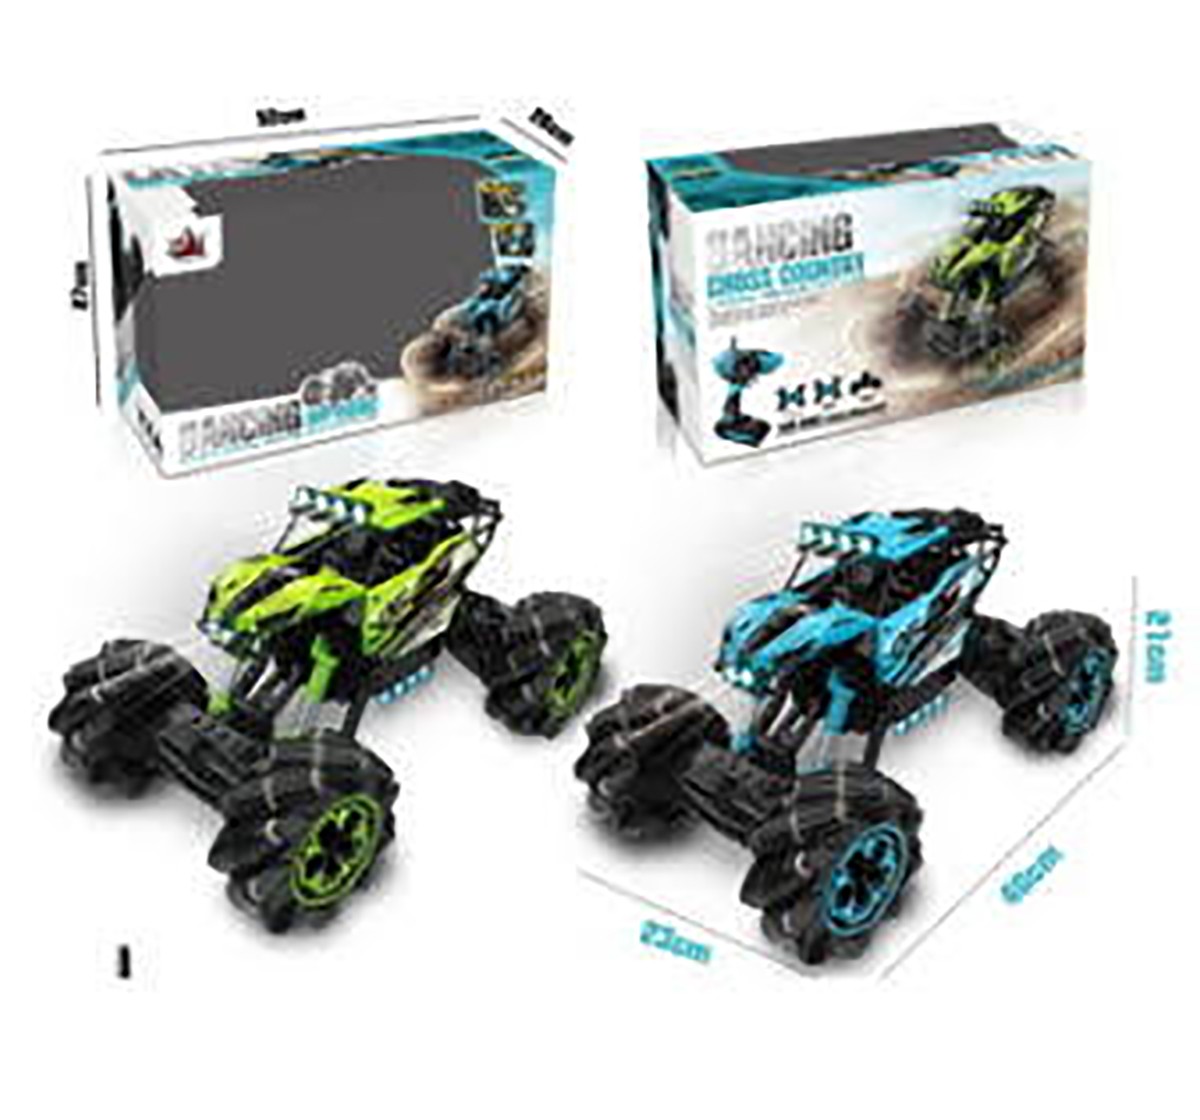 Dihua 1:10 Remote Control Stunt Lateral and Oblique Drift, Dancing off-Road Car Remote Control Toys for Kids age 14Y+ 